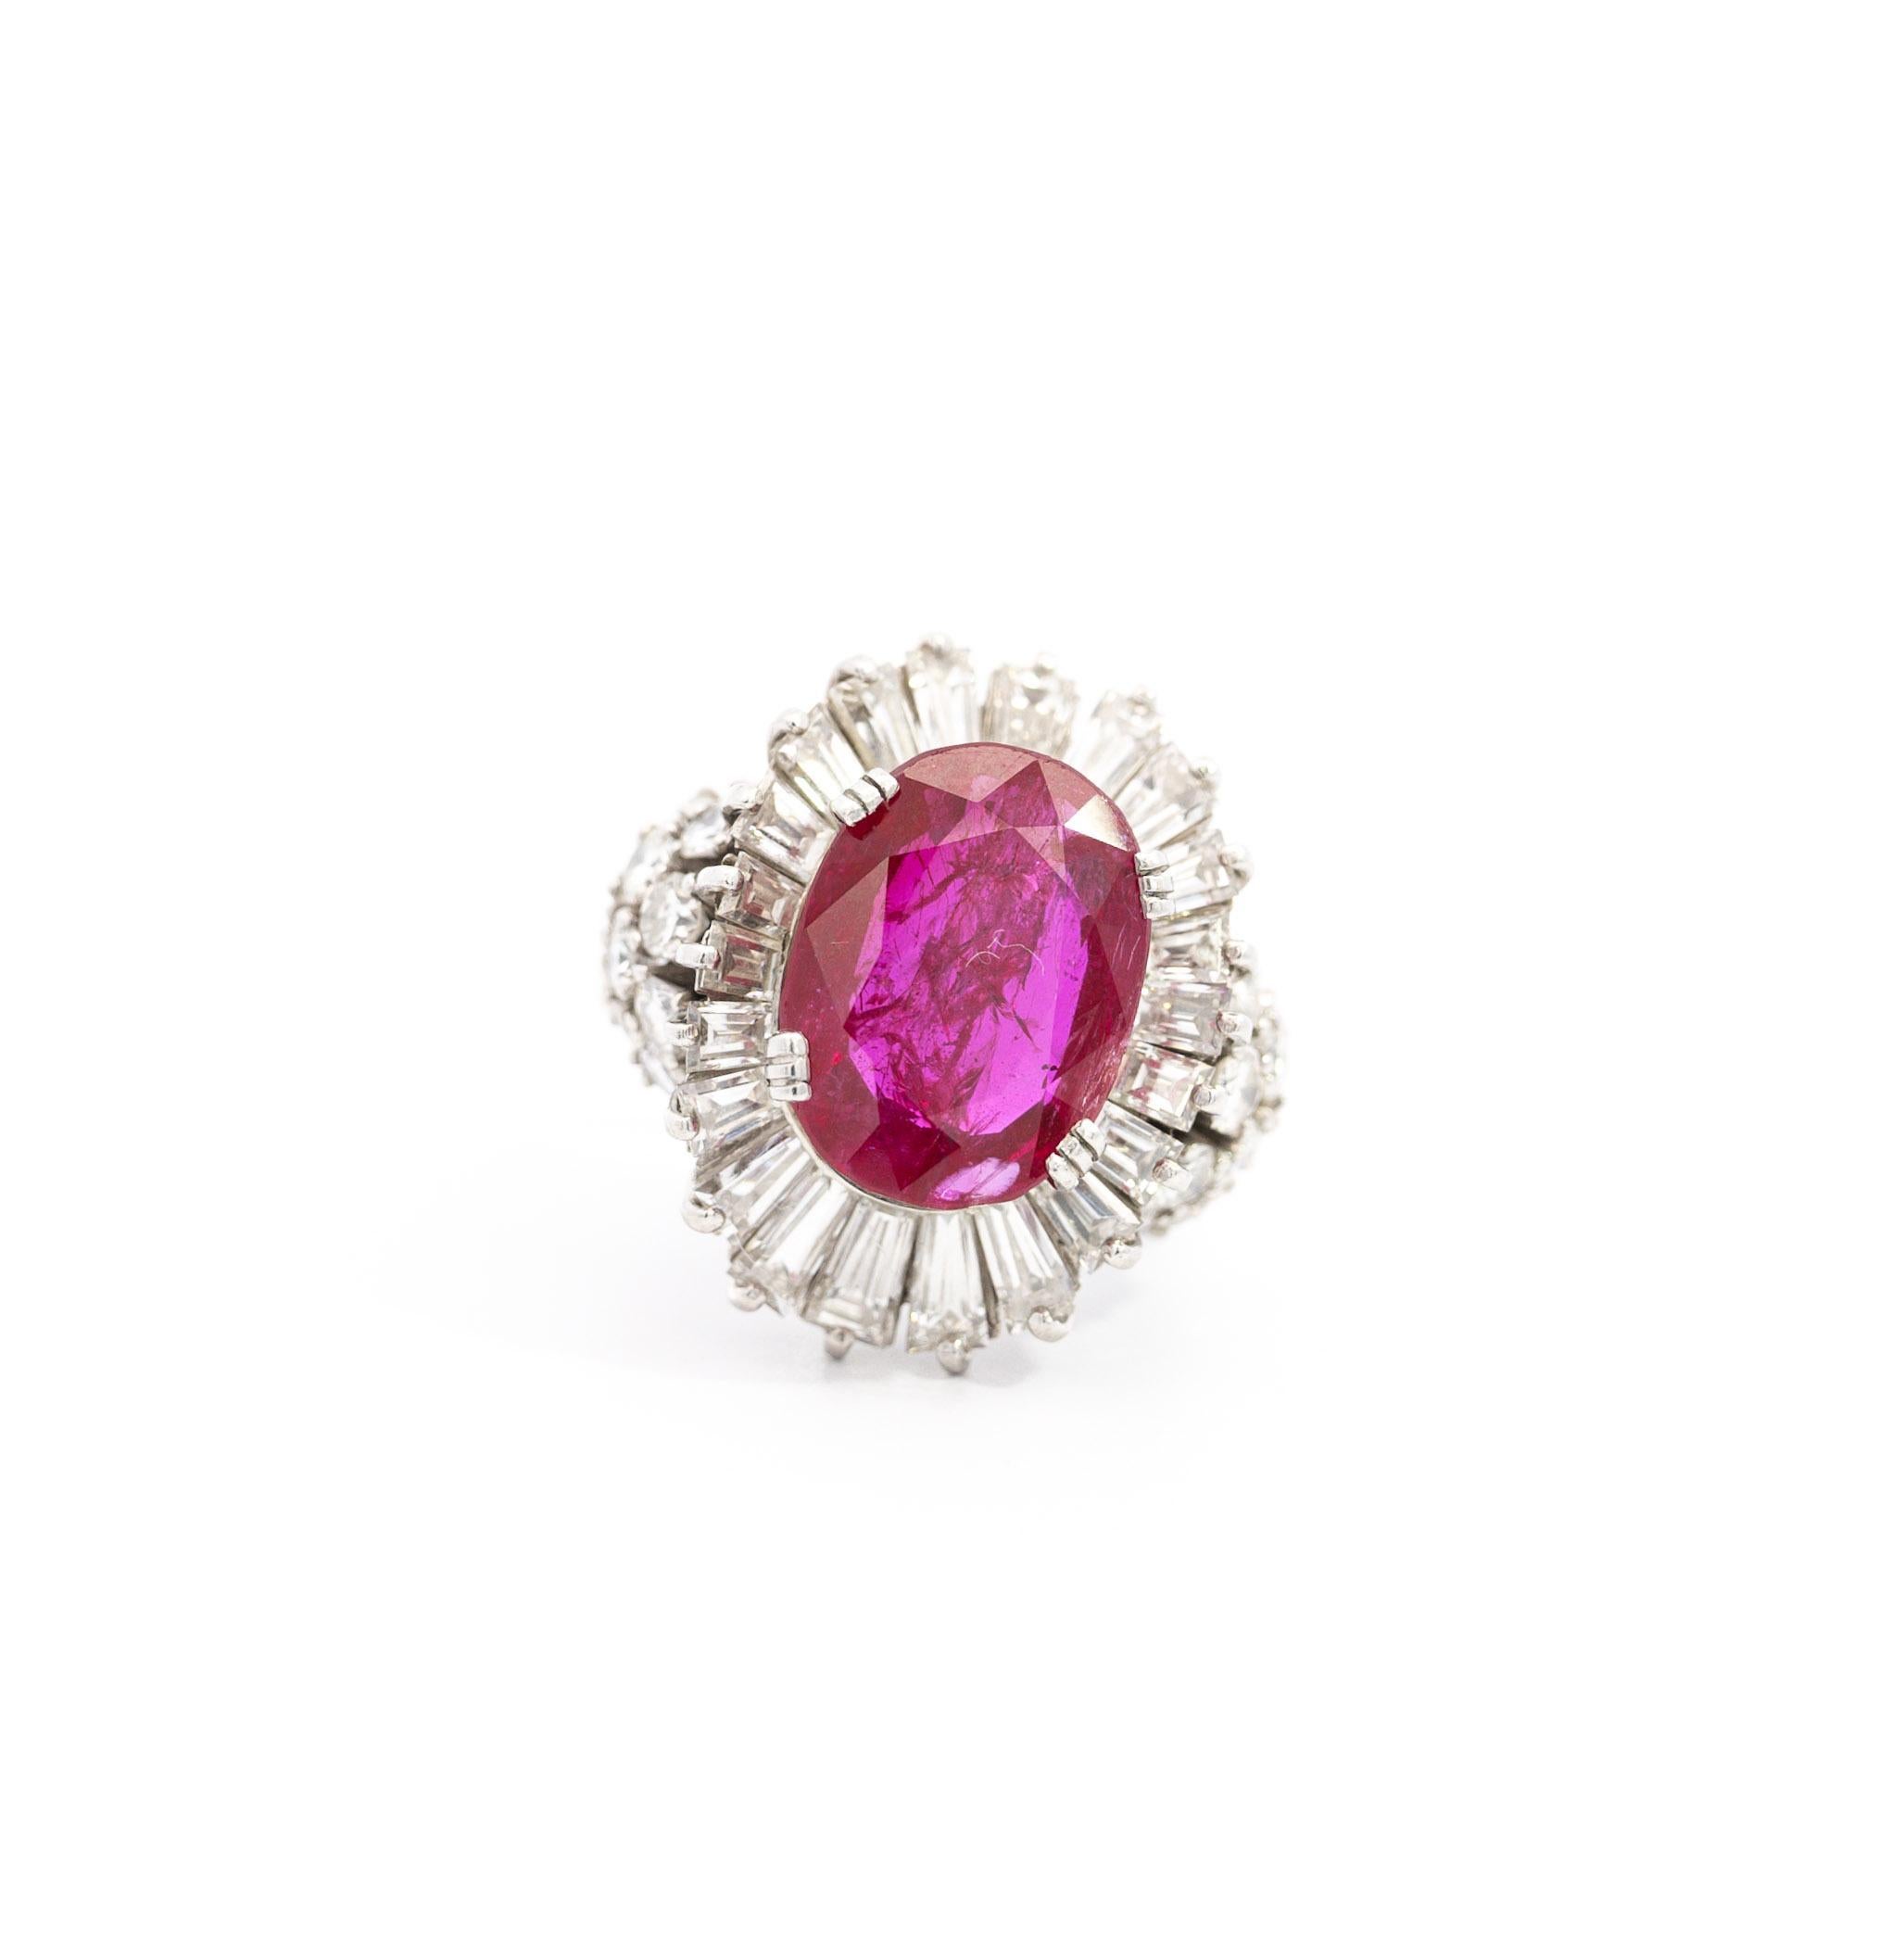 Vintage AGL Certified 6.95 Carat No Heat Burma Ruby & Diamond Cocktail Ring In Excellent Condition For Sale In Miami, FL